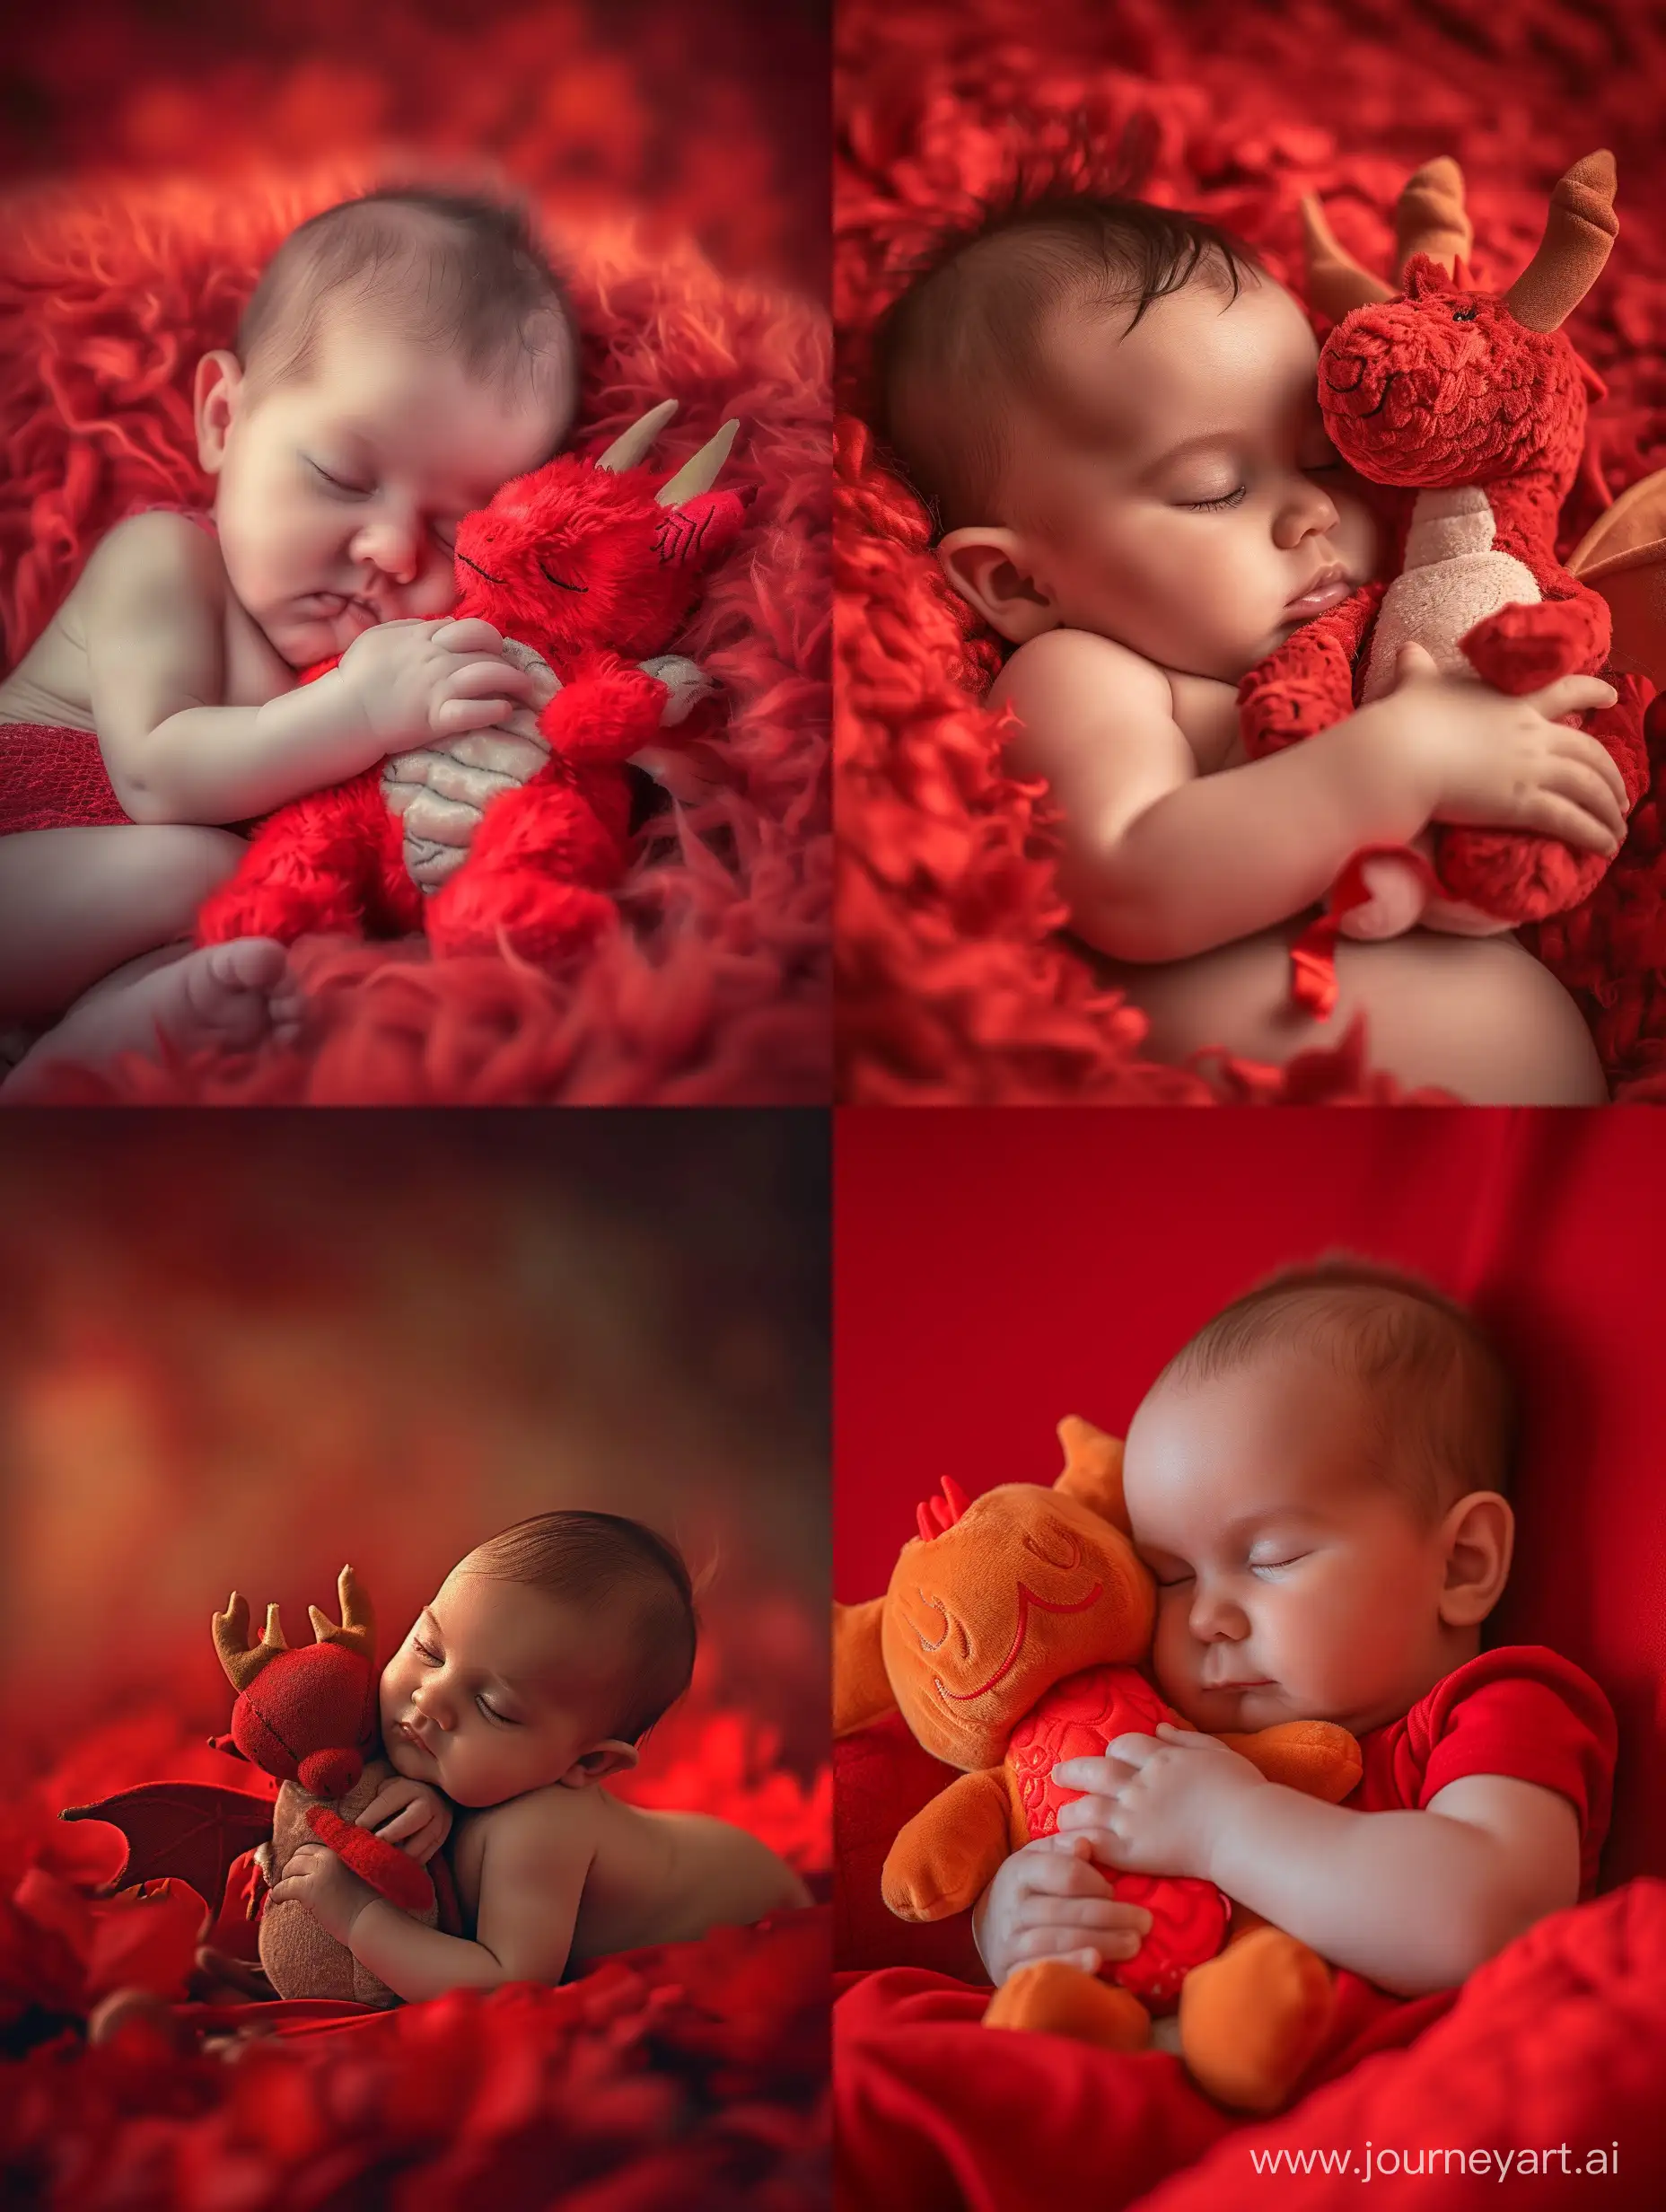 Sleeping-Baby-Embracing-Dragon-Plushie-in-Vibrant-Red-Setting